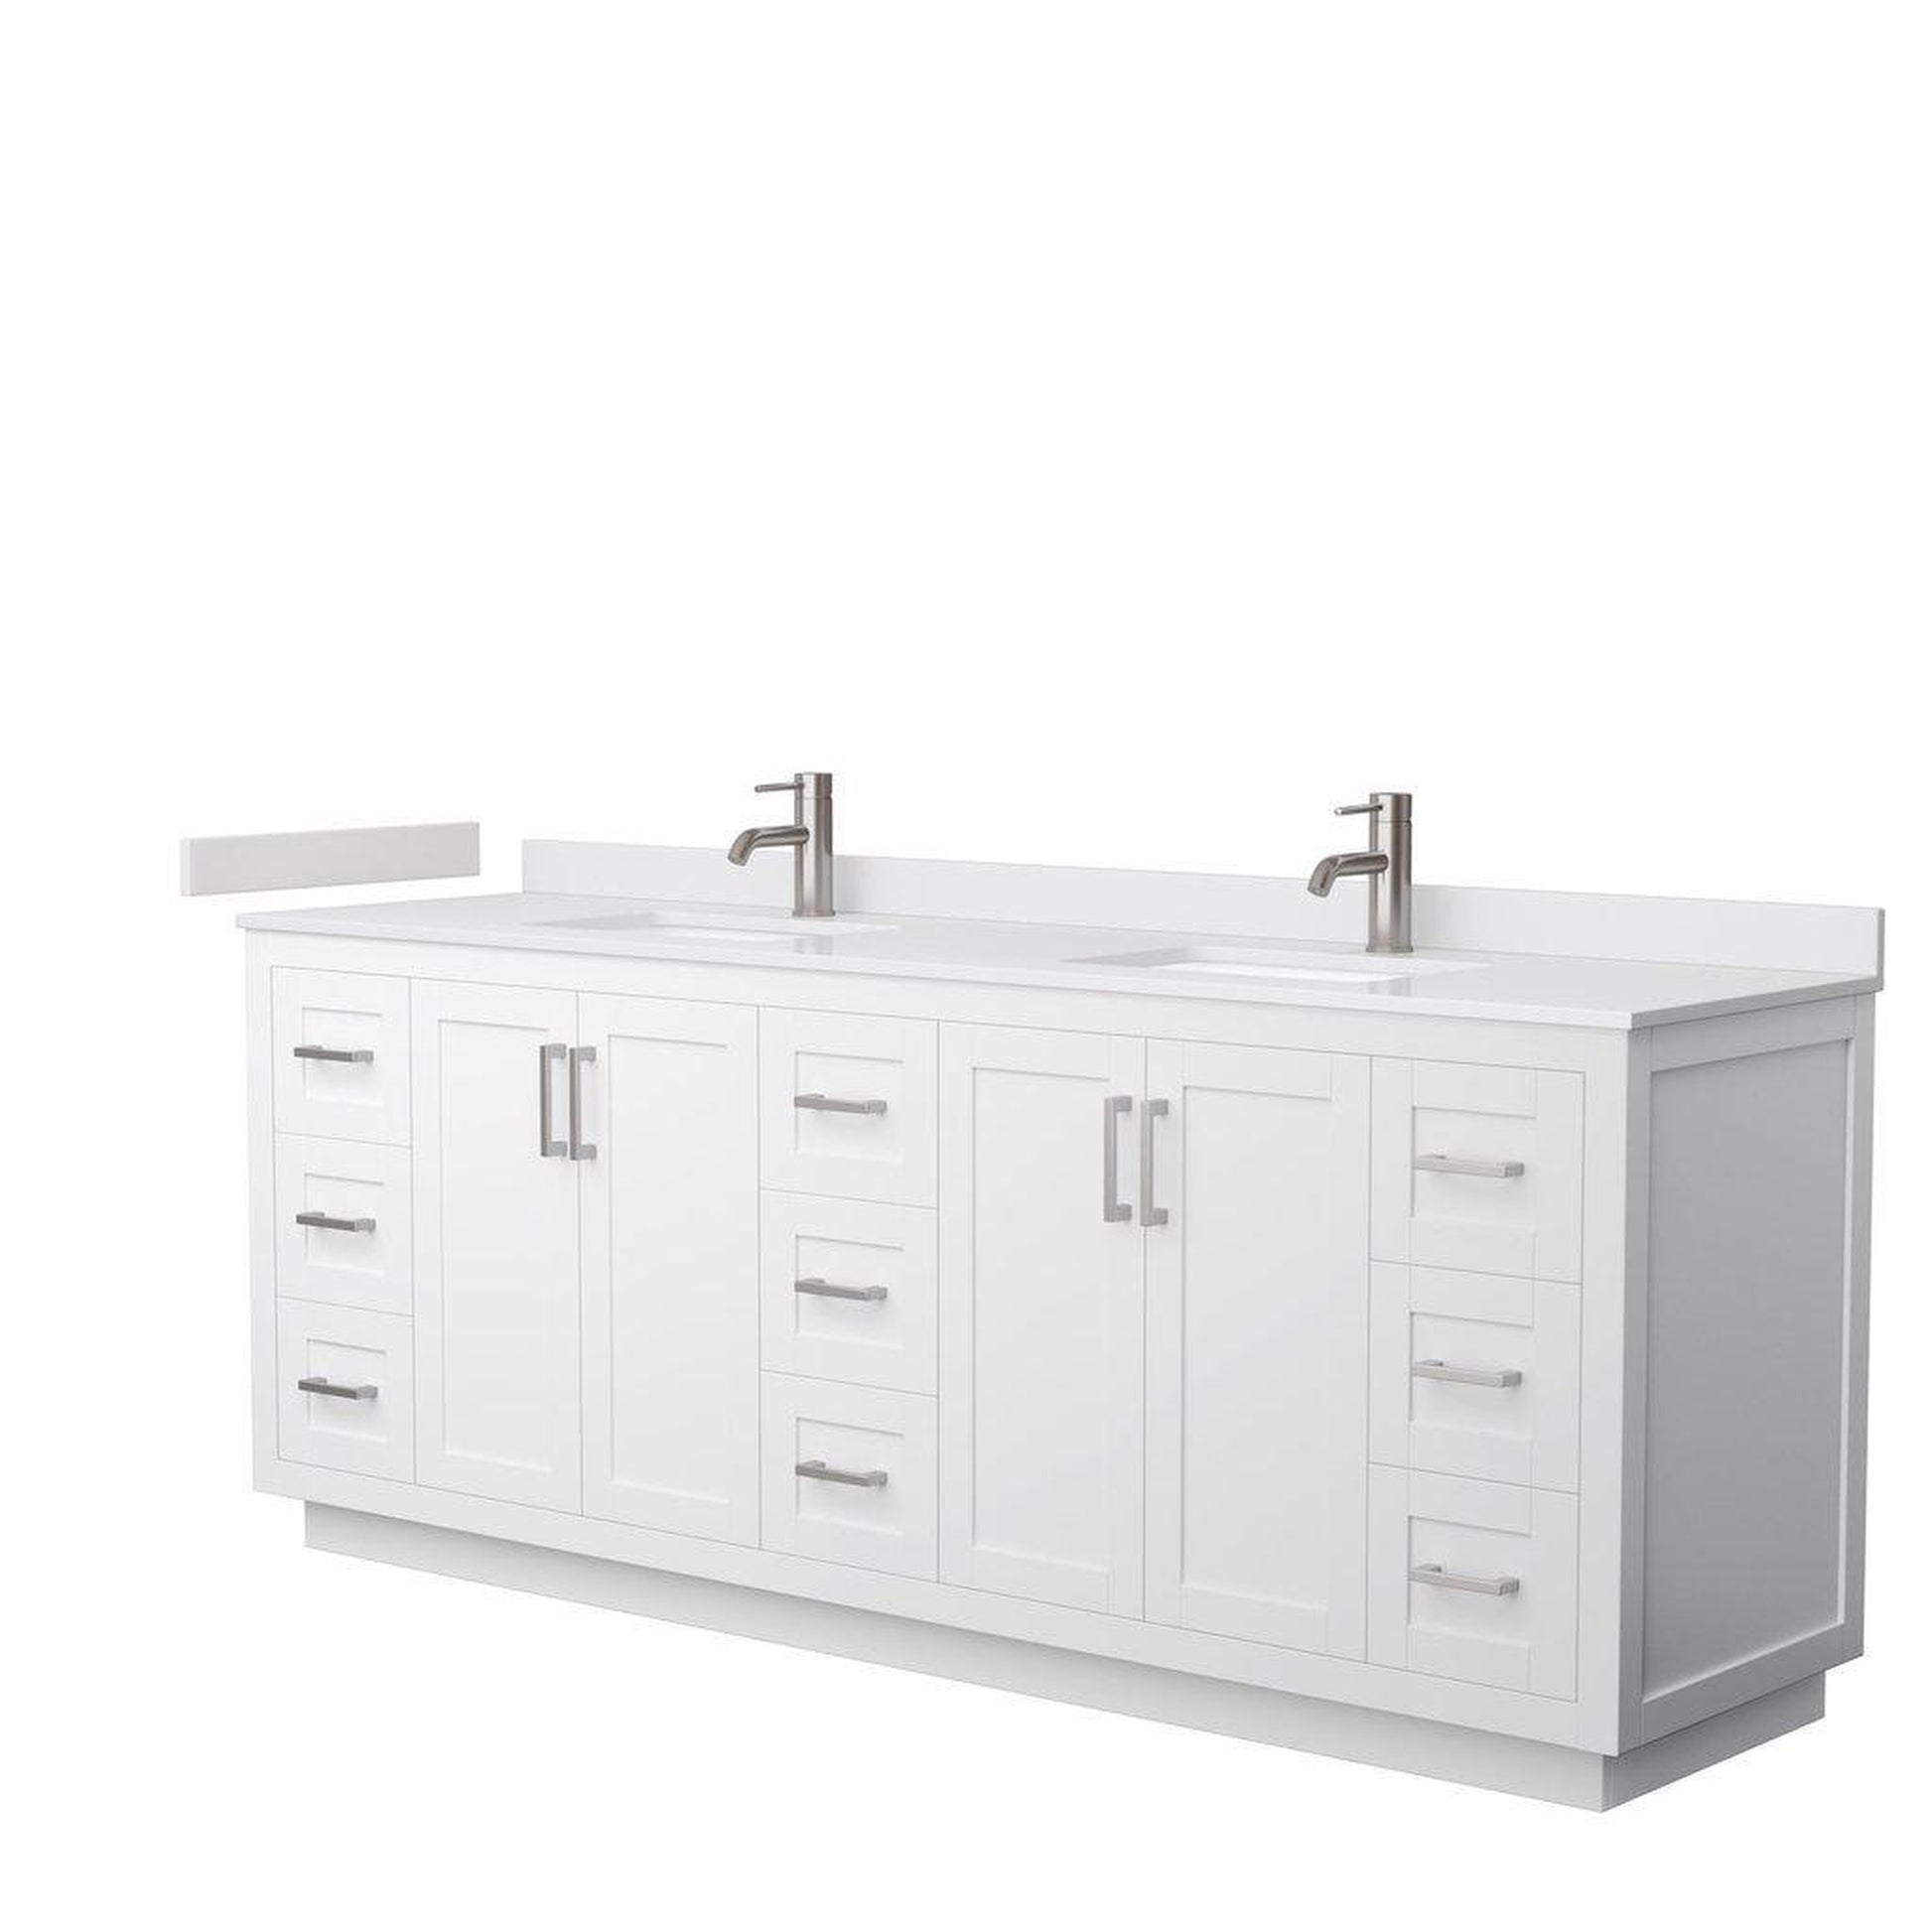 Wyndham Collection Miranda 84" Double Bathroom White Vanity Set With White Cultured Marble Countertop, Undermount Square Sink, And Brushed Nickel Trim